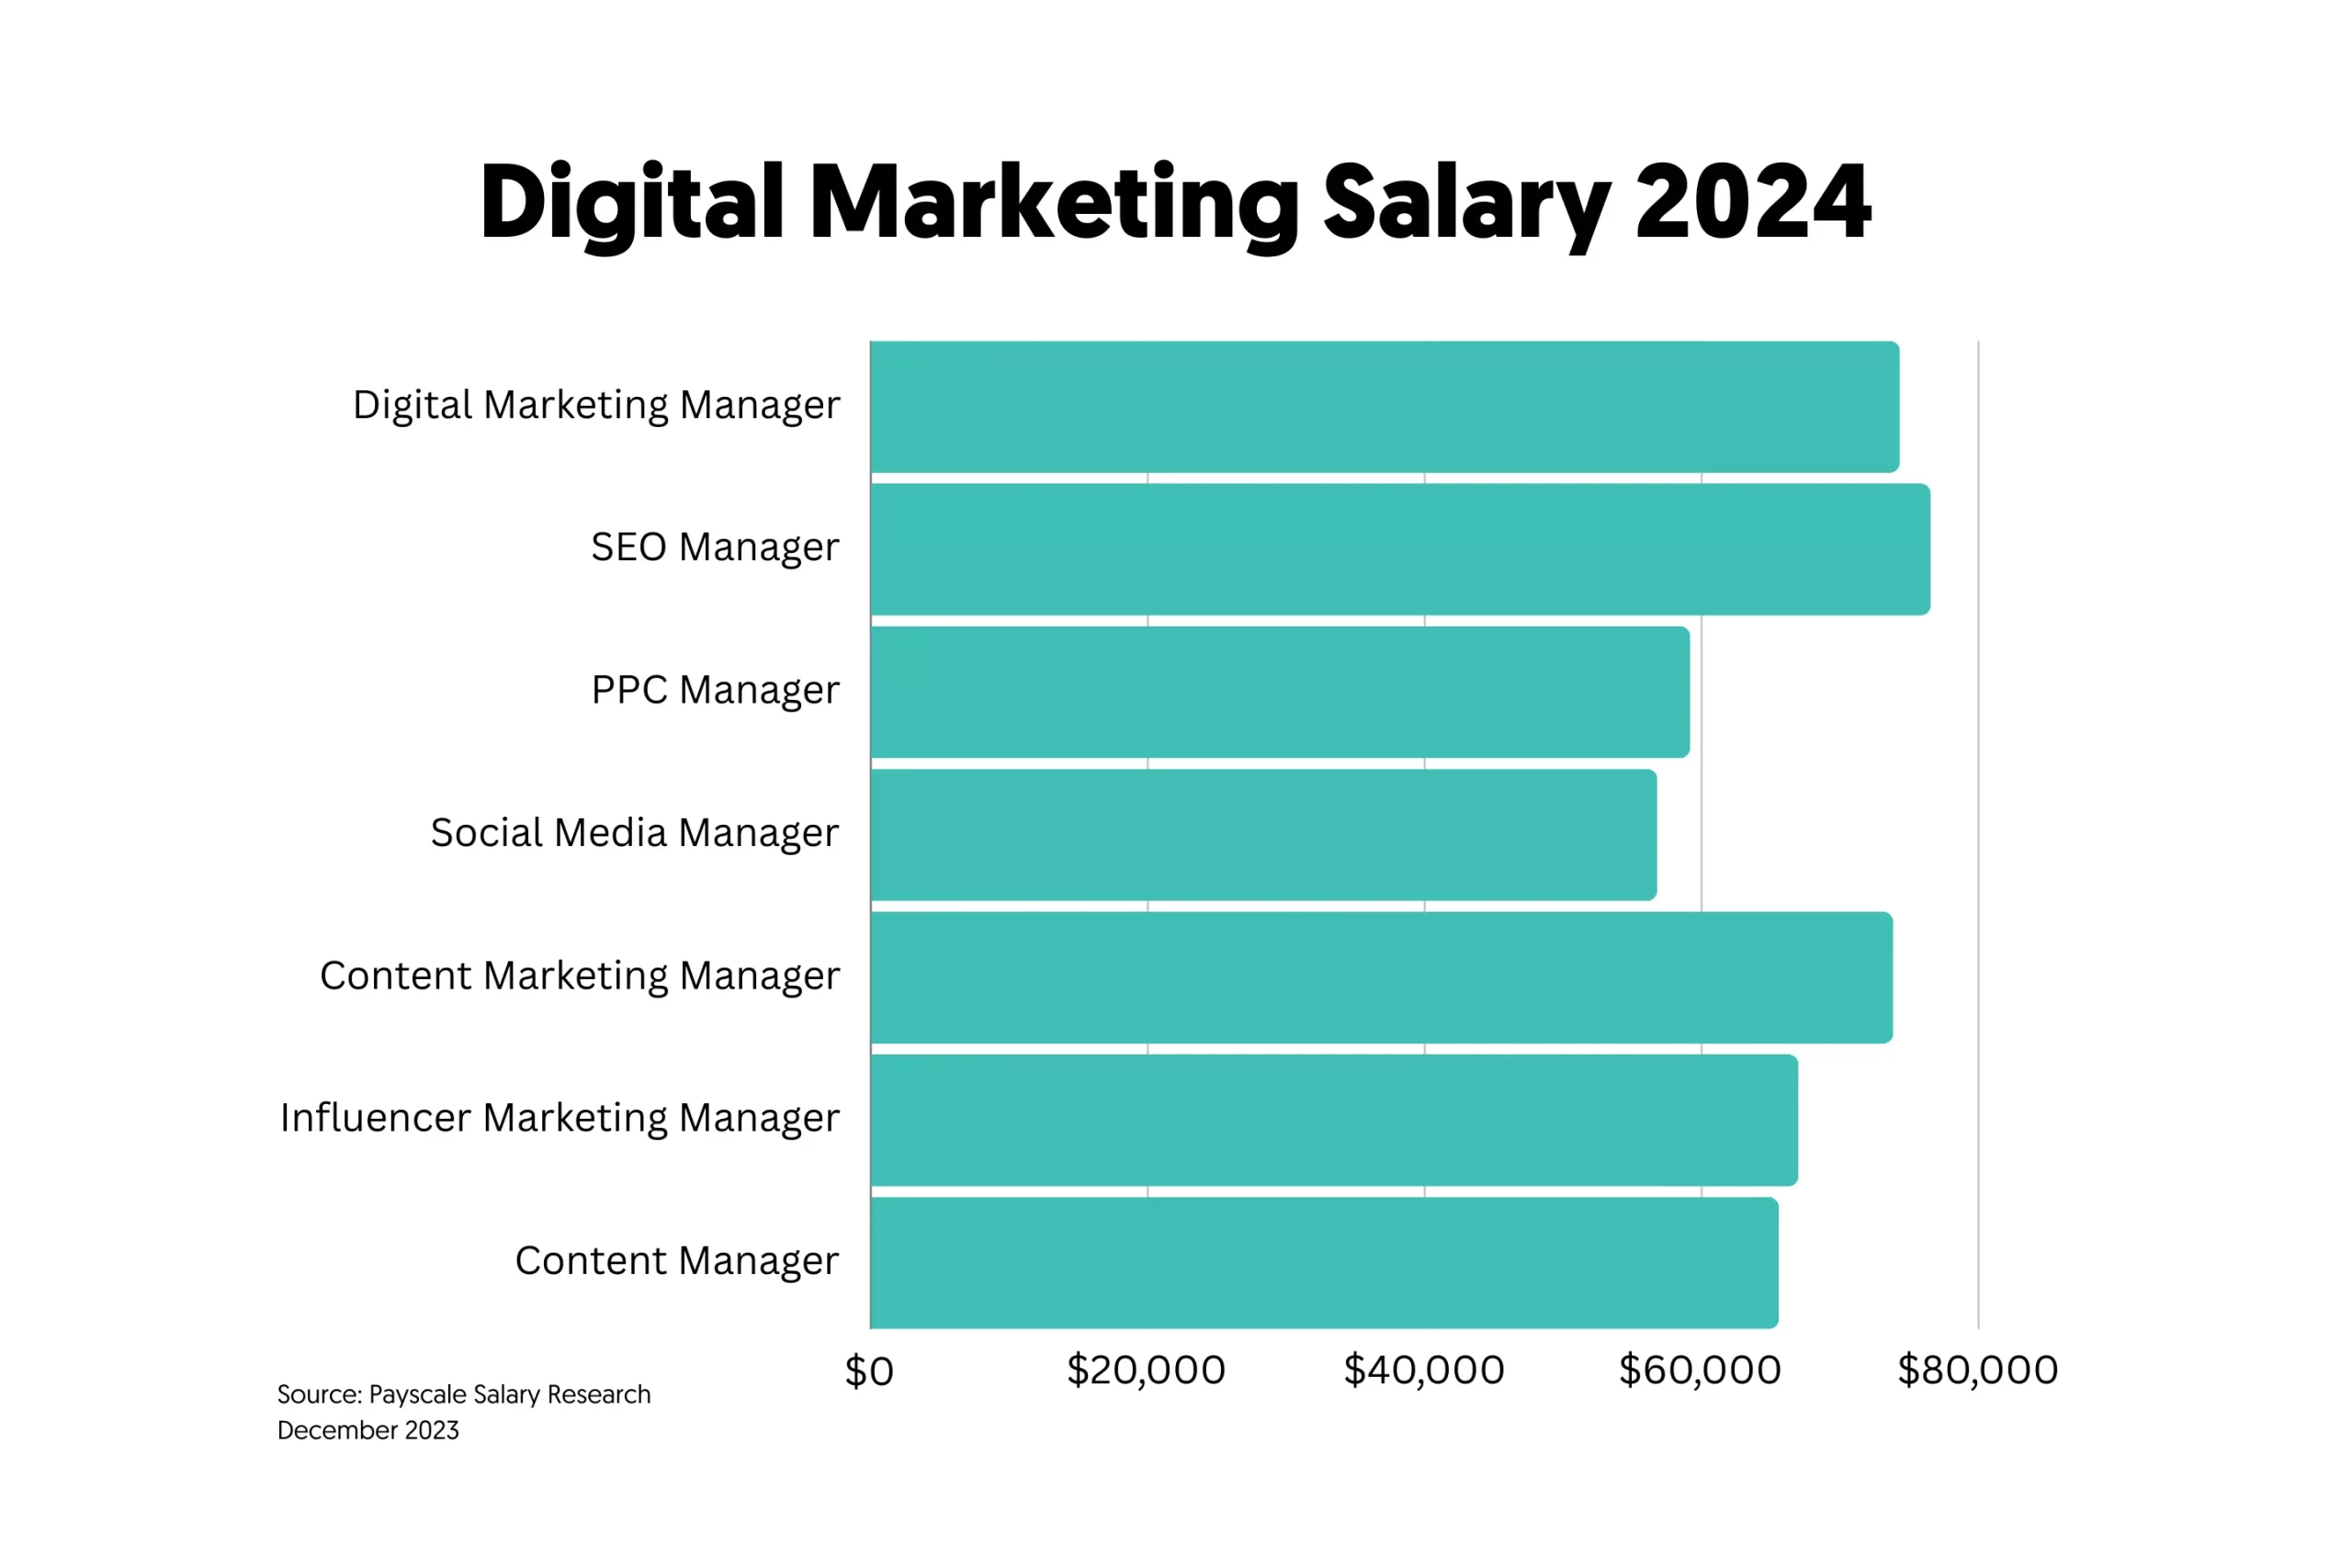  The image shows the average salary for seven digital marketing positions in 2024.